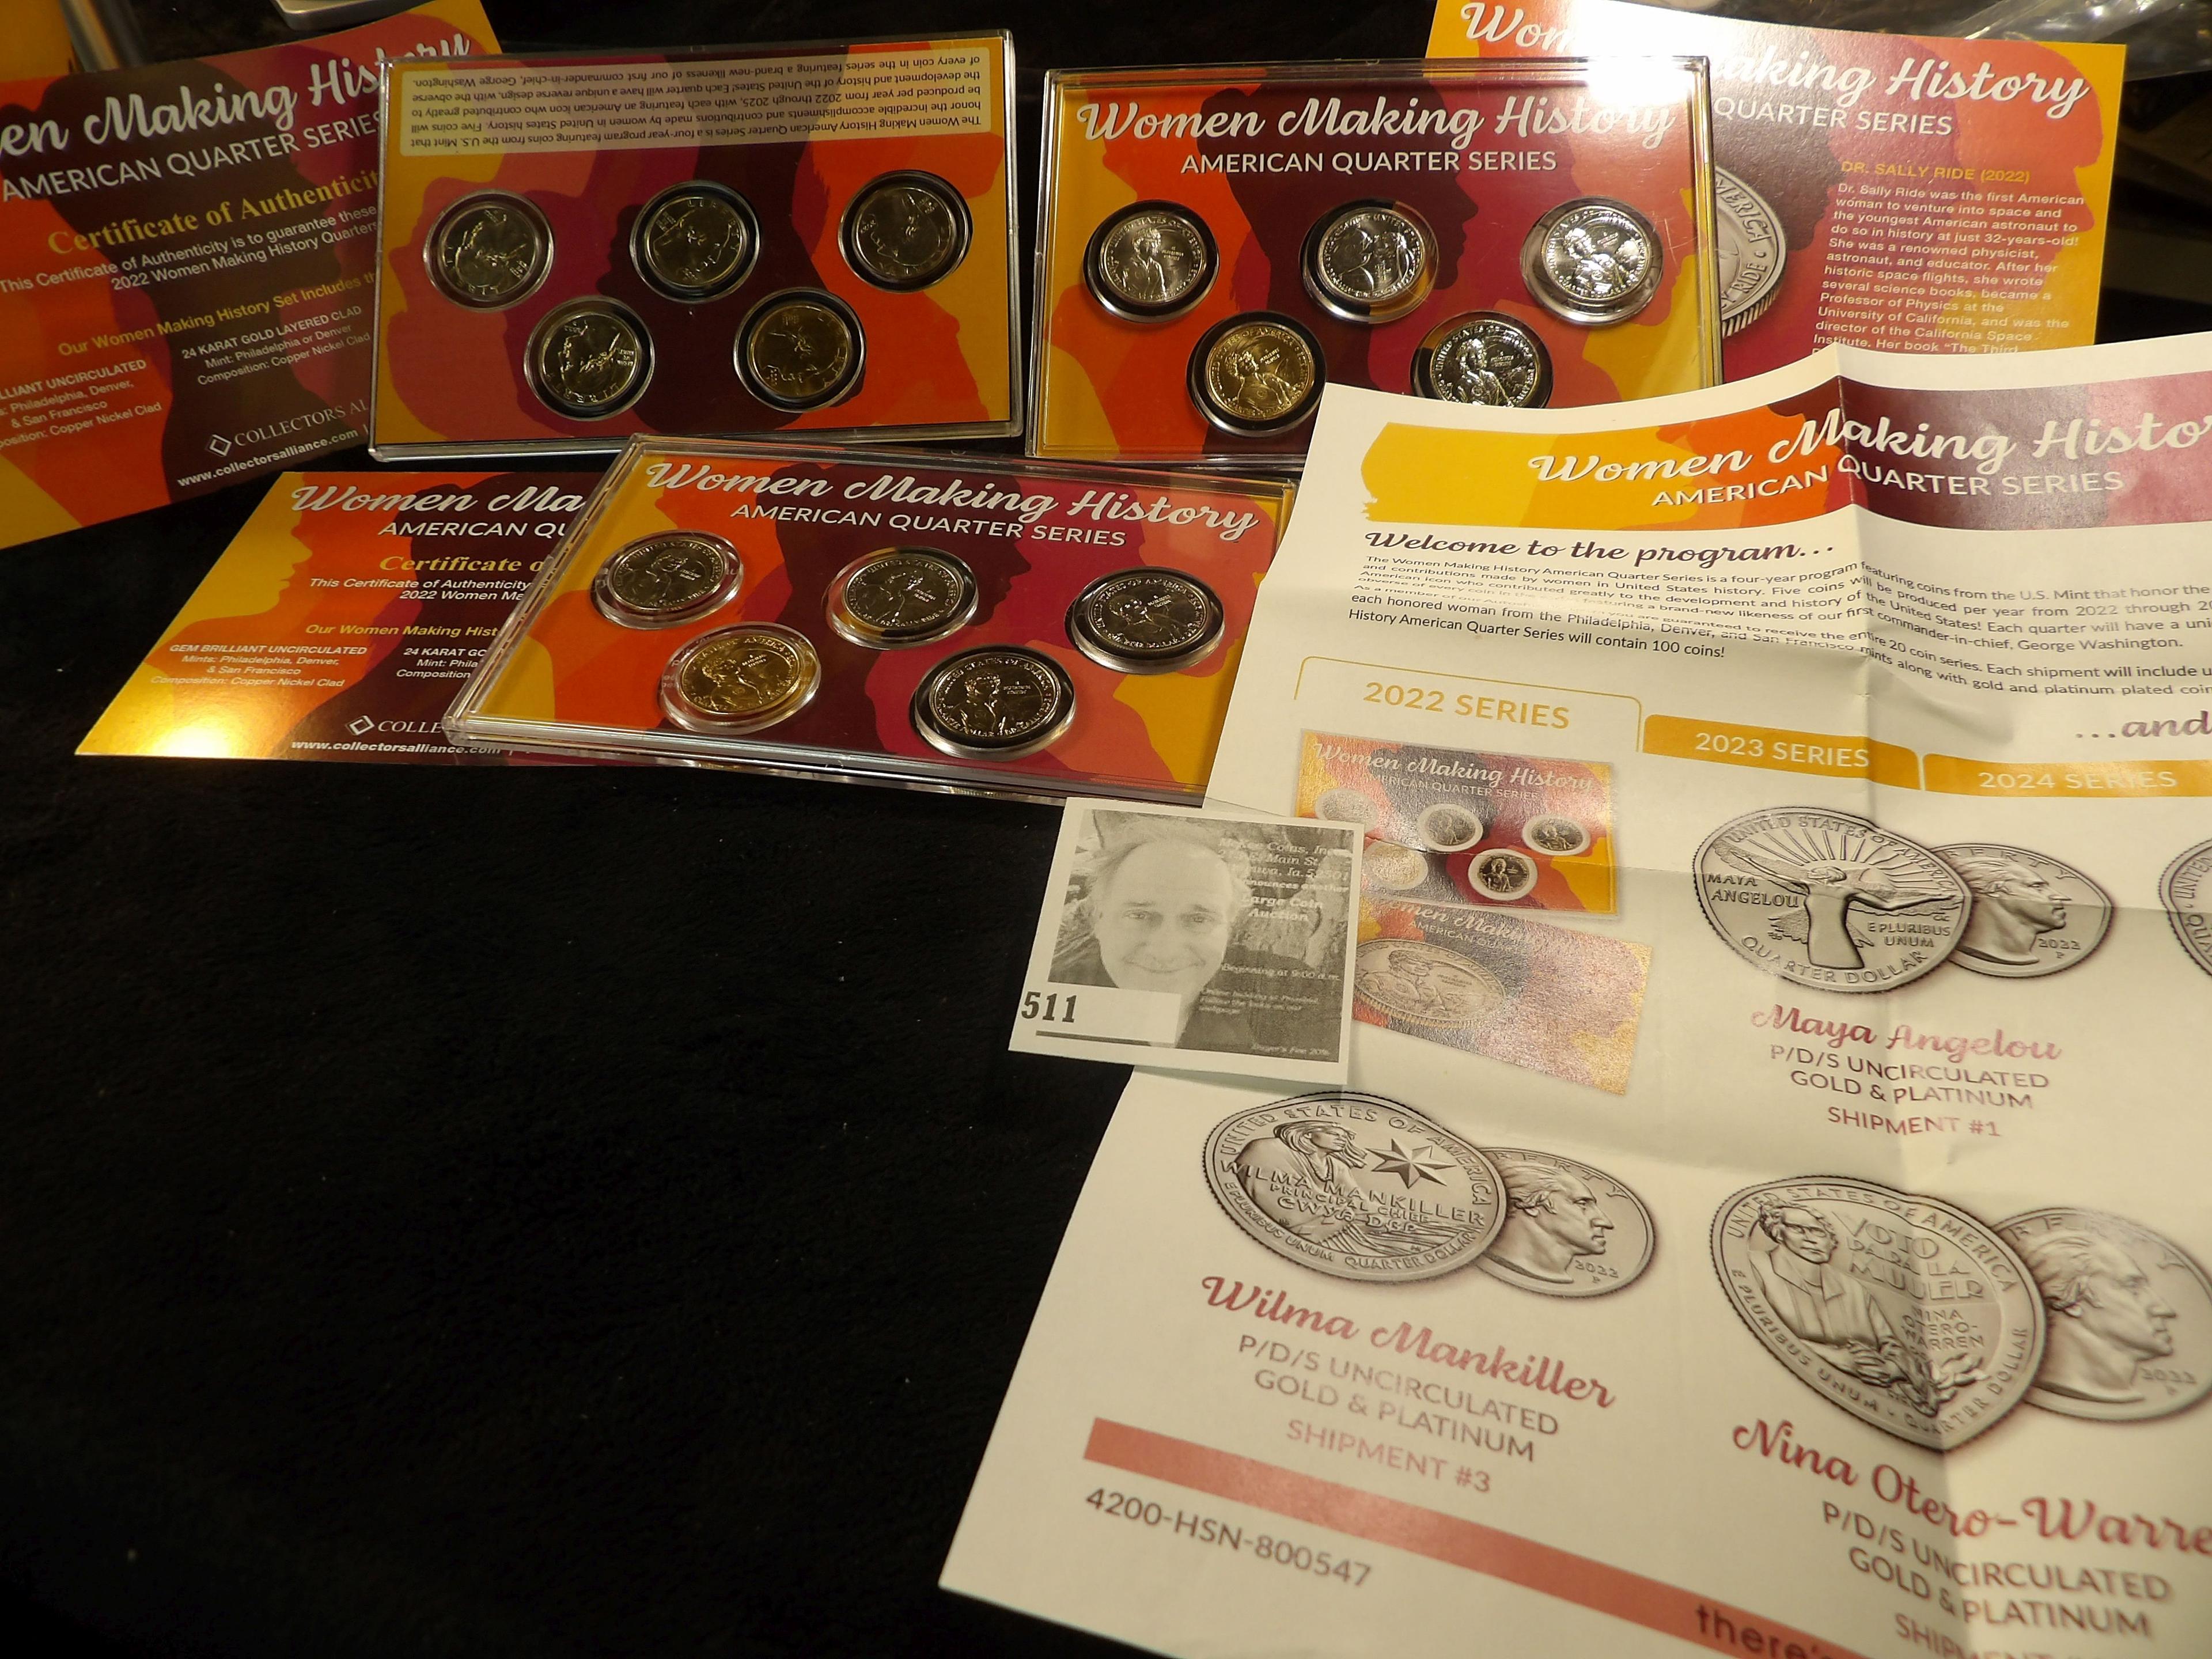 (3) Five-Coin American Quarter Series "Women Making History" Coin Sets. Complete with literature.